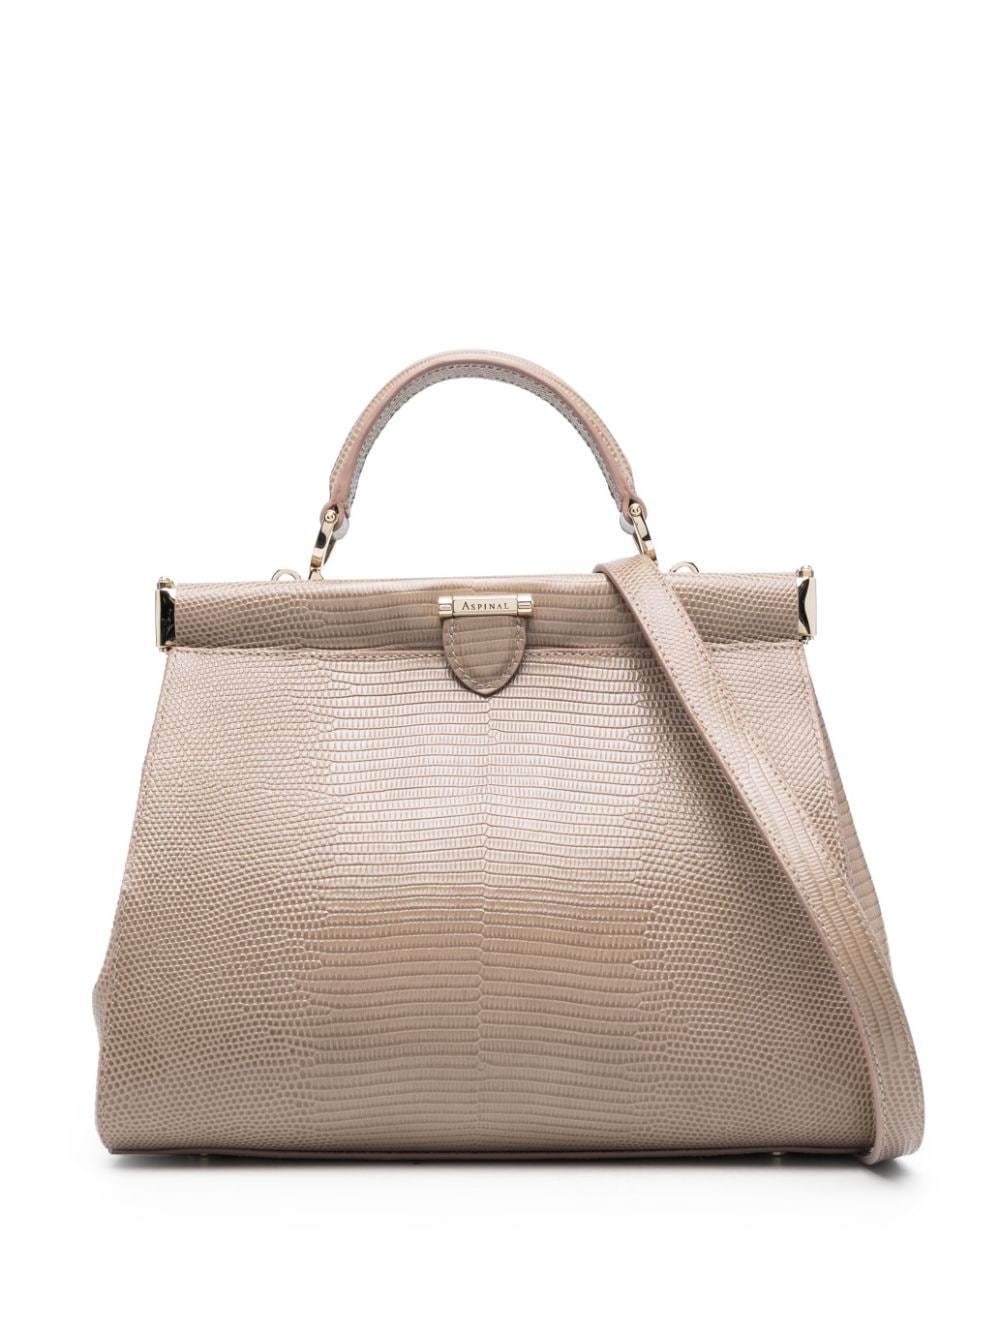 ASPINAL OF LONDON SMALL FLORENCE LEATHER TOTE BAG